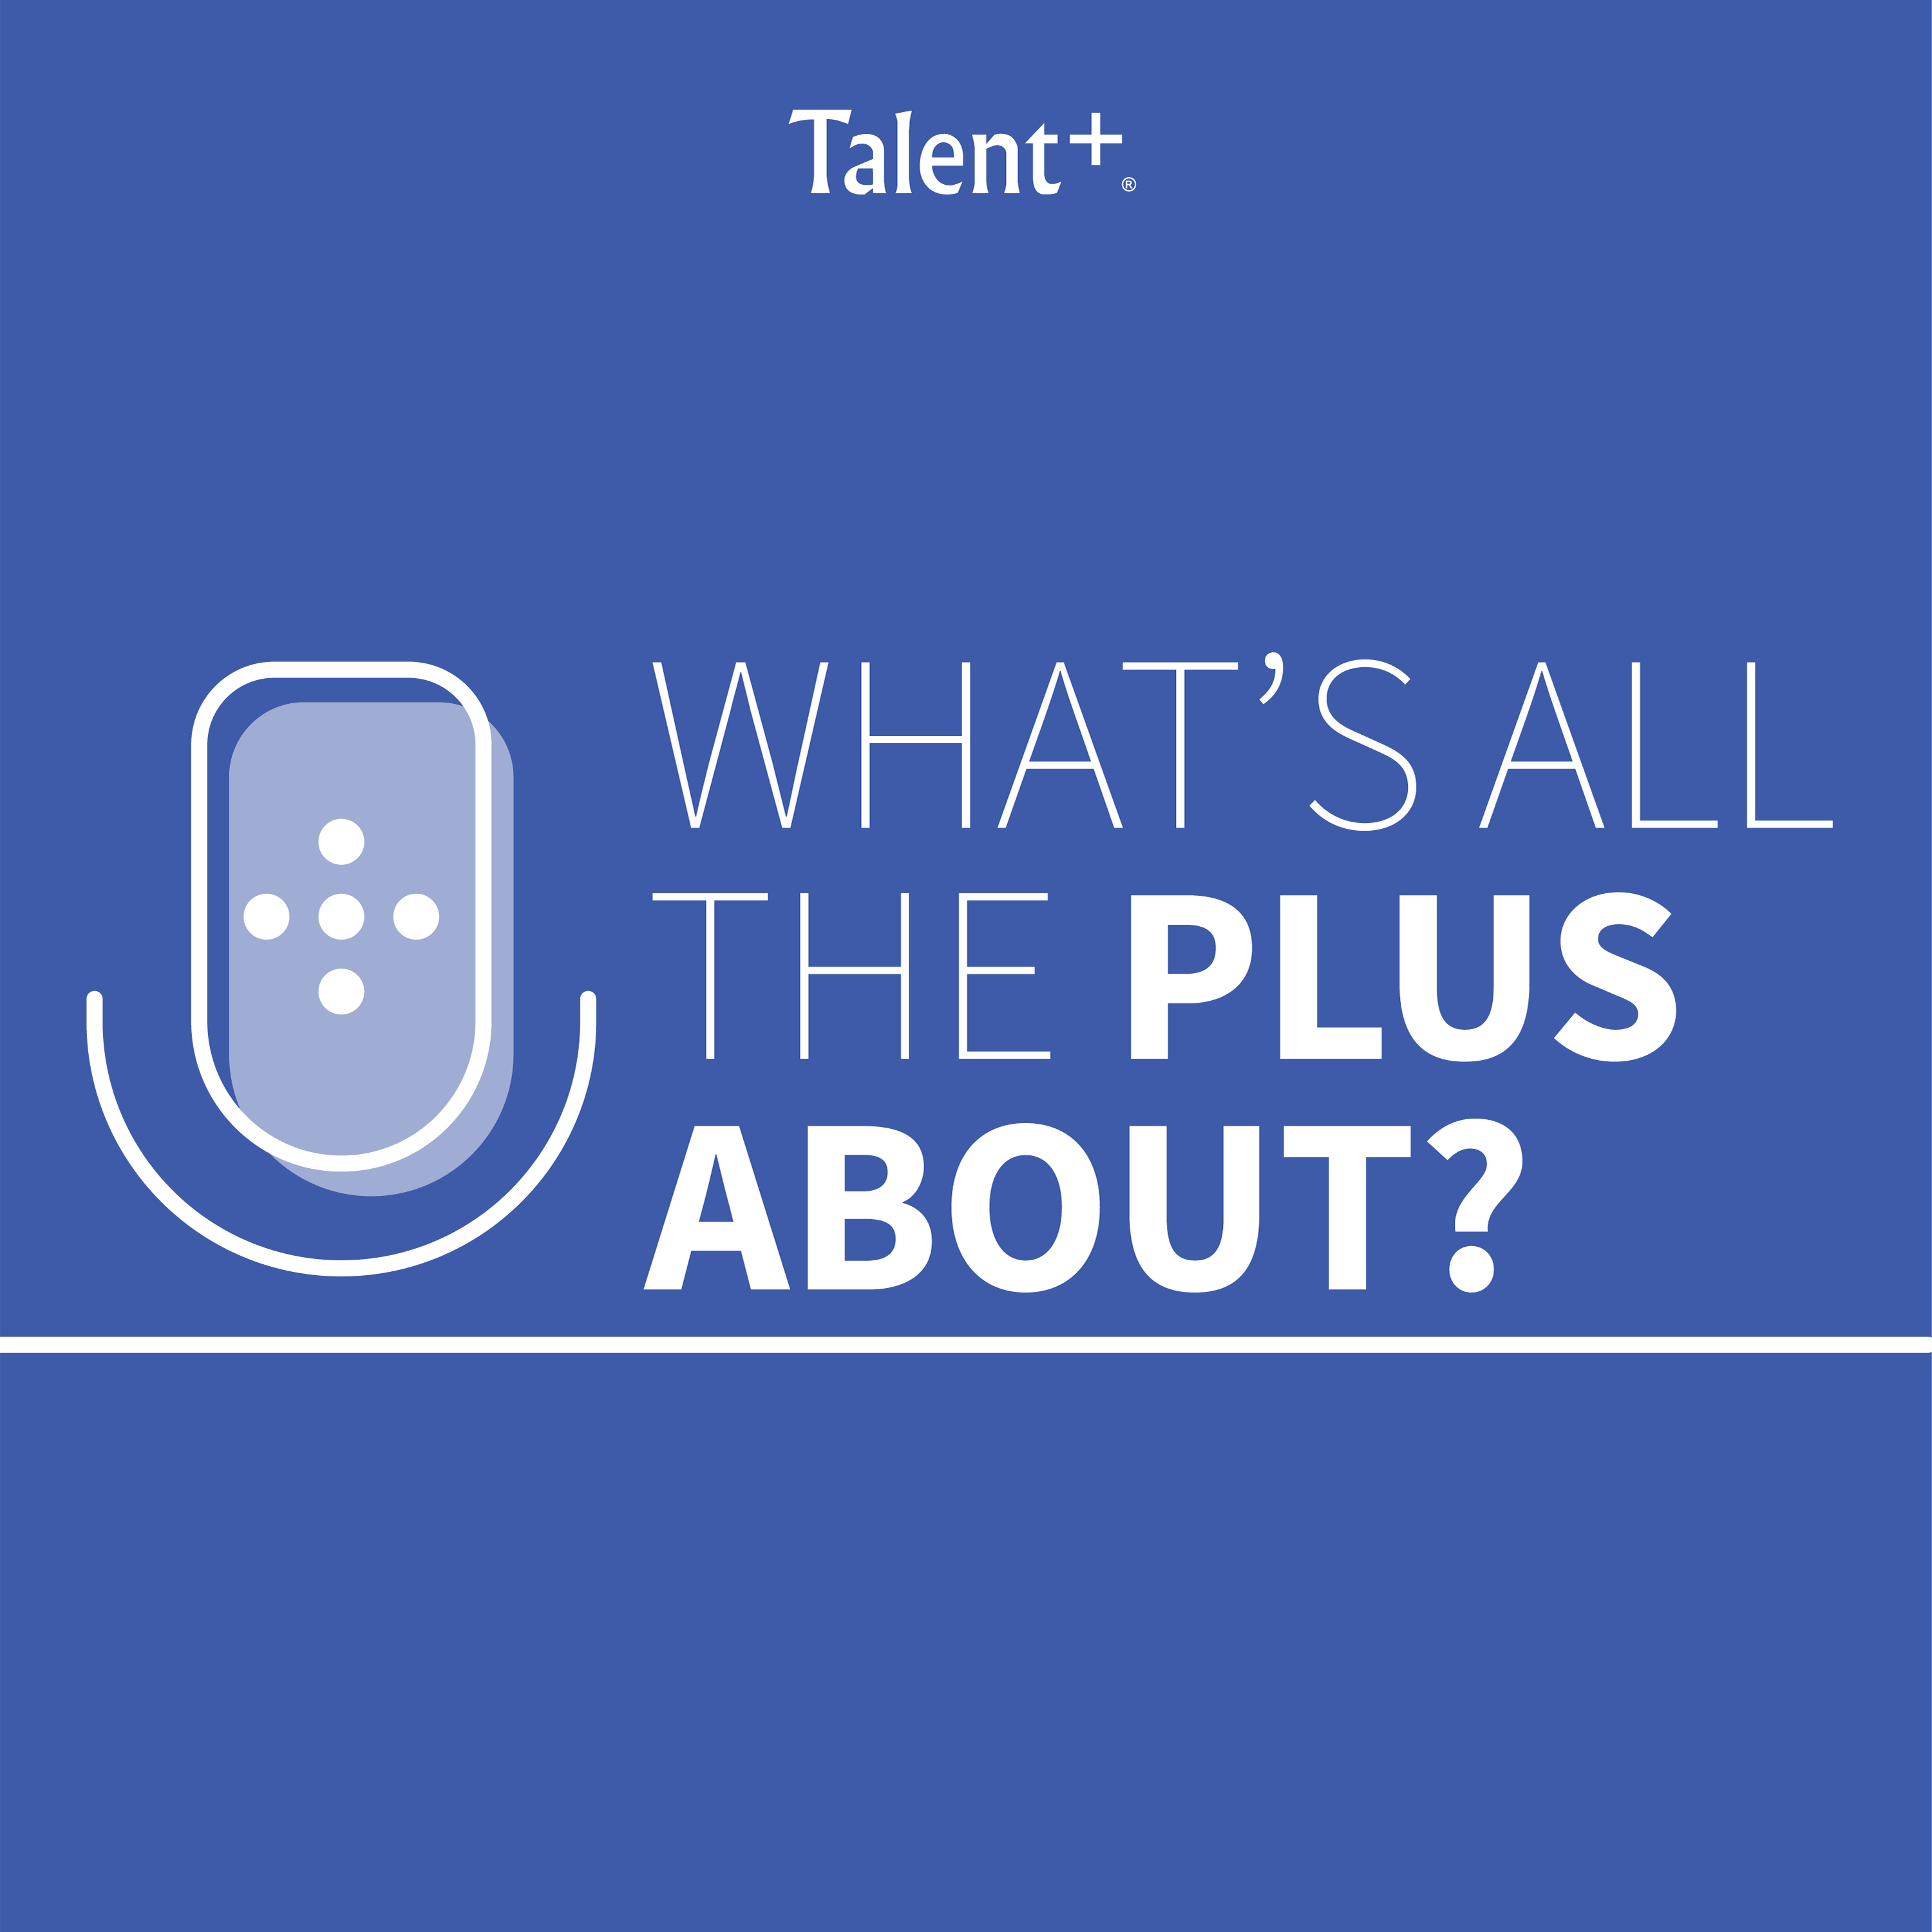 Woodhead Logo - The Plus in Talent Plus: Relationships with Kent Woodhead